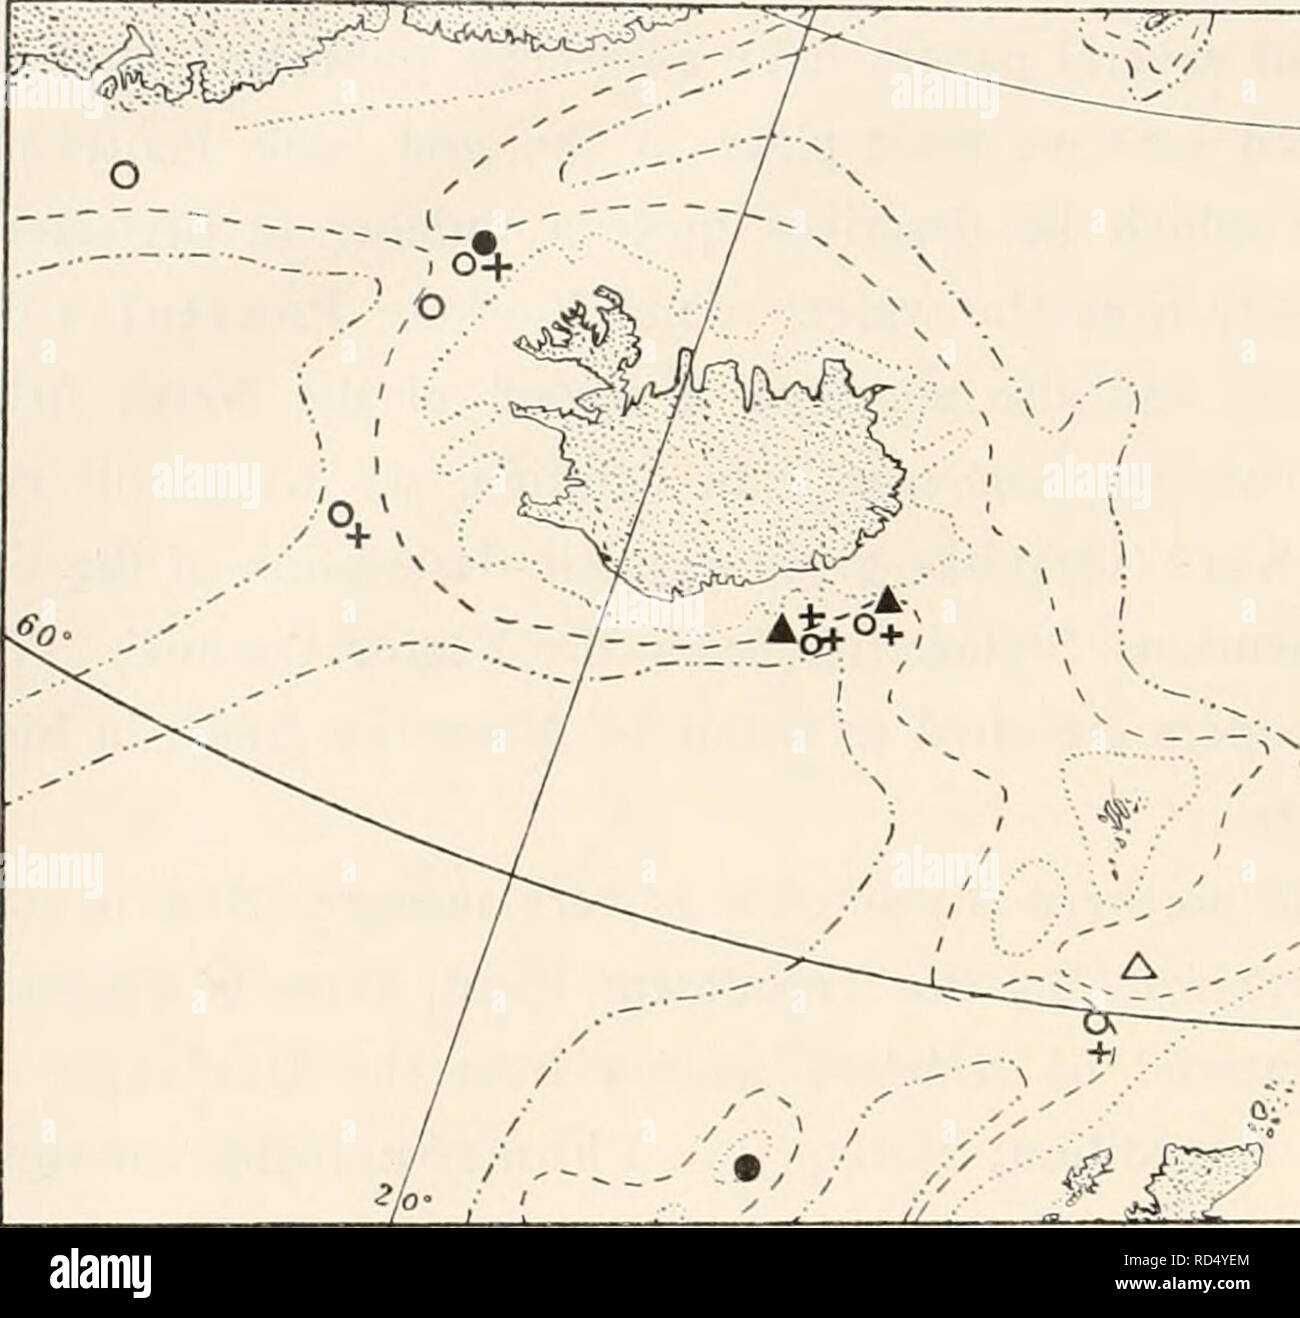 . The Danish Ingolf-Expedition. Scientific expeditions; Arctic Ocean. 24 STYLASTERIDAE must be regarded as characteristic forms of the large biocoenosis of the coral reefs. This is also strengthened by the single discovery of Stylaster gemmascens made in the Hjelte Fjord in the neighbourhood of Bergen, where Dr. O. Nordgaard has obtained two small fragments of colonies from the coral reef there. We thus see that the two Stylaster species which occur on the coast of Norway, form interesting parallels in the animal community of the northern coral reefs to the Stylasterids of the tropical coral r Stock Photo